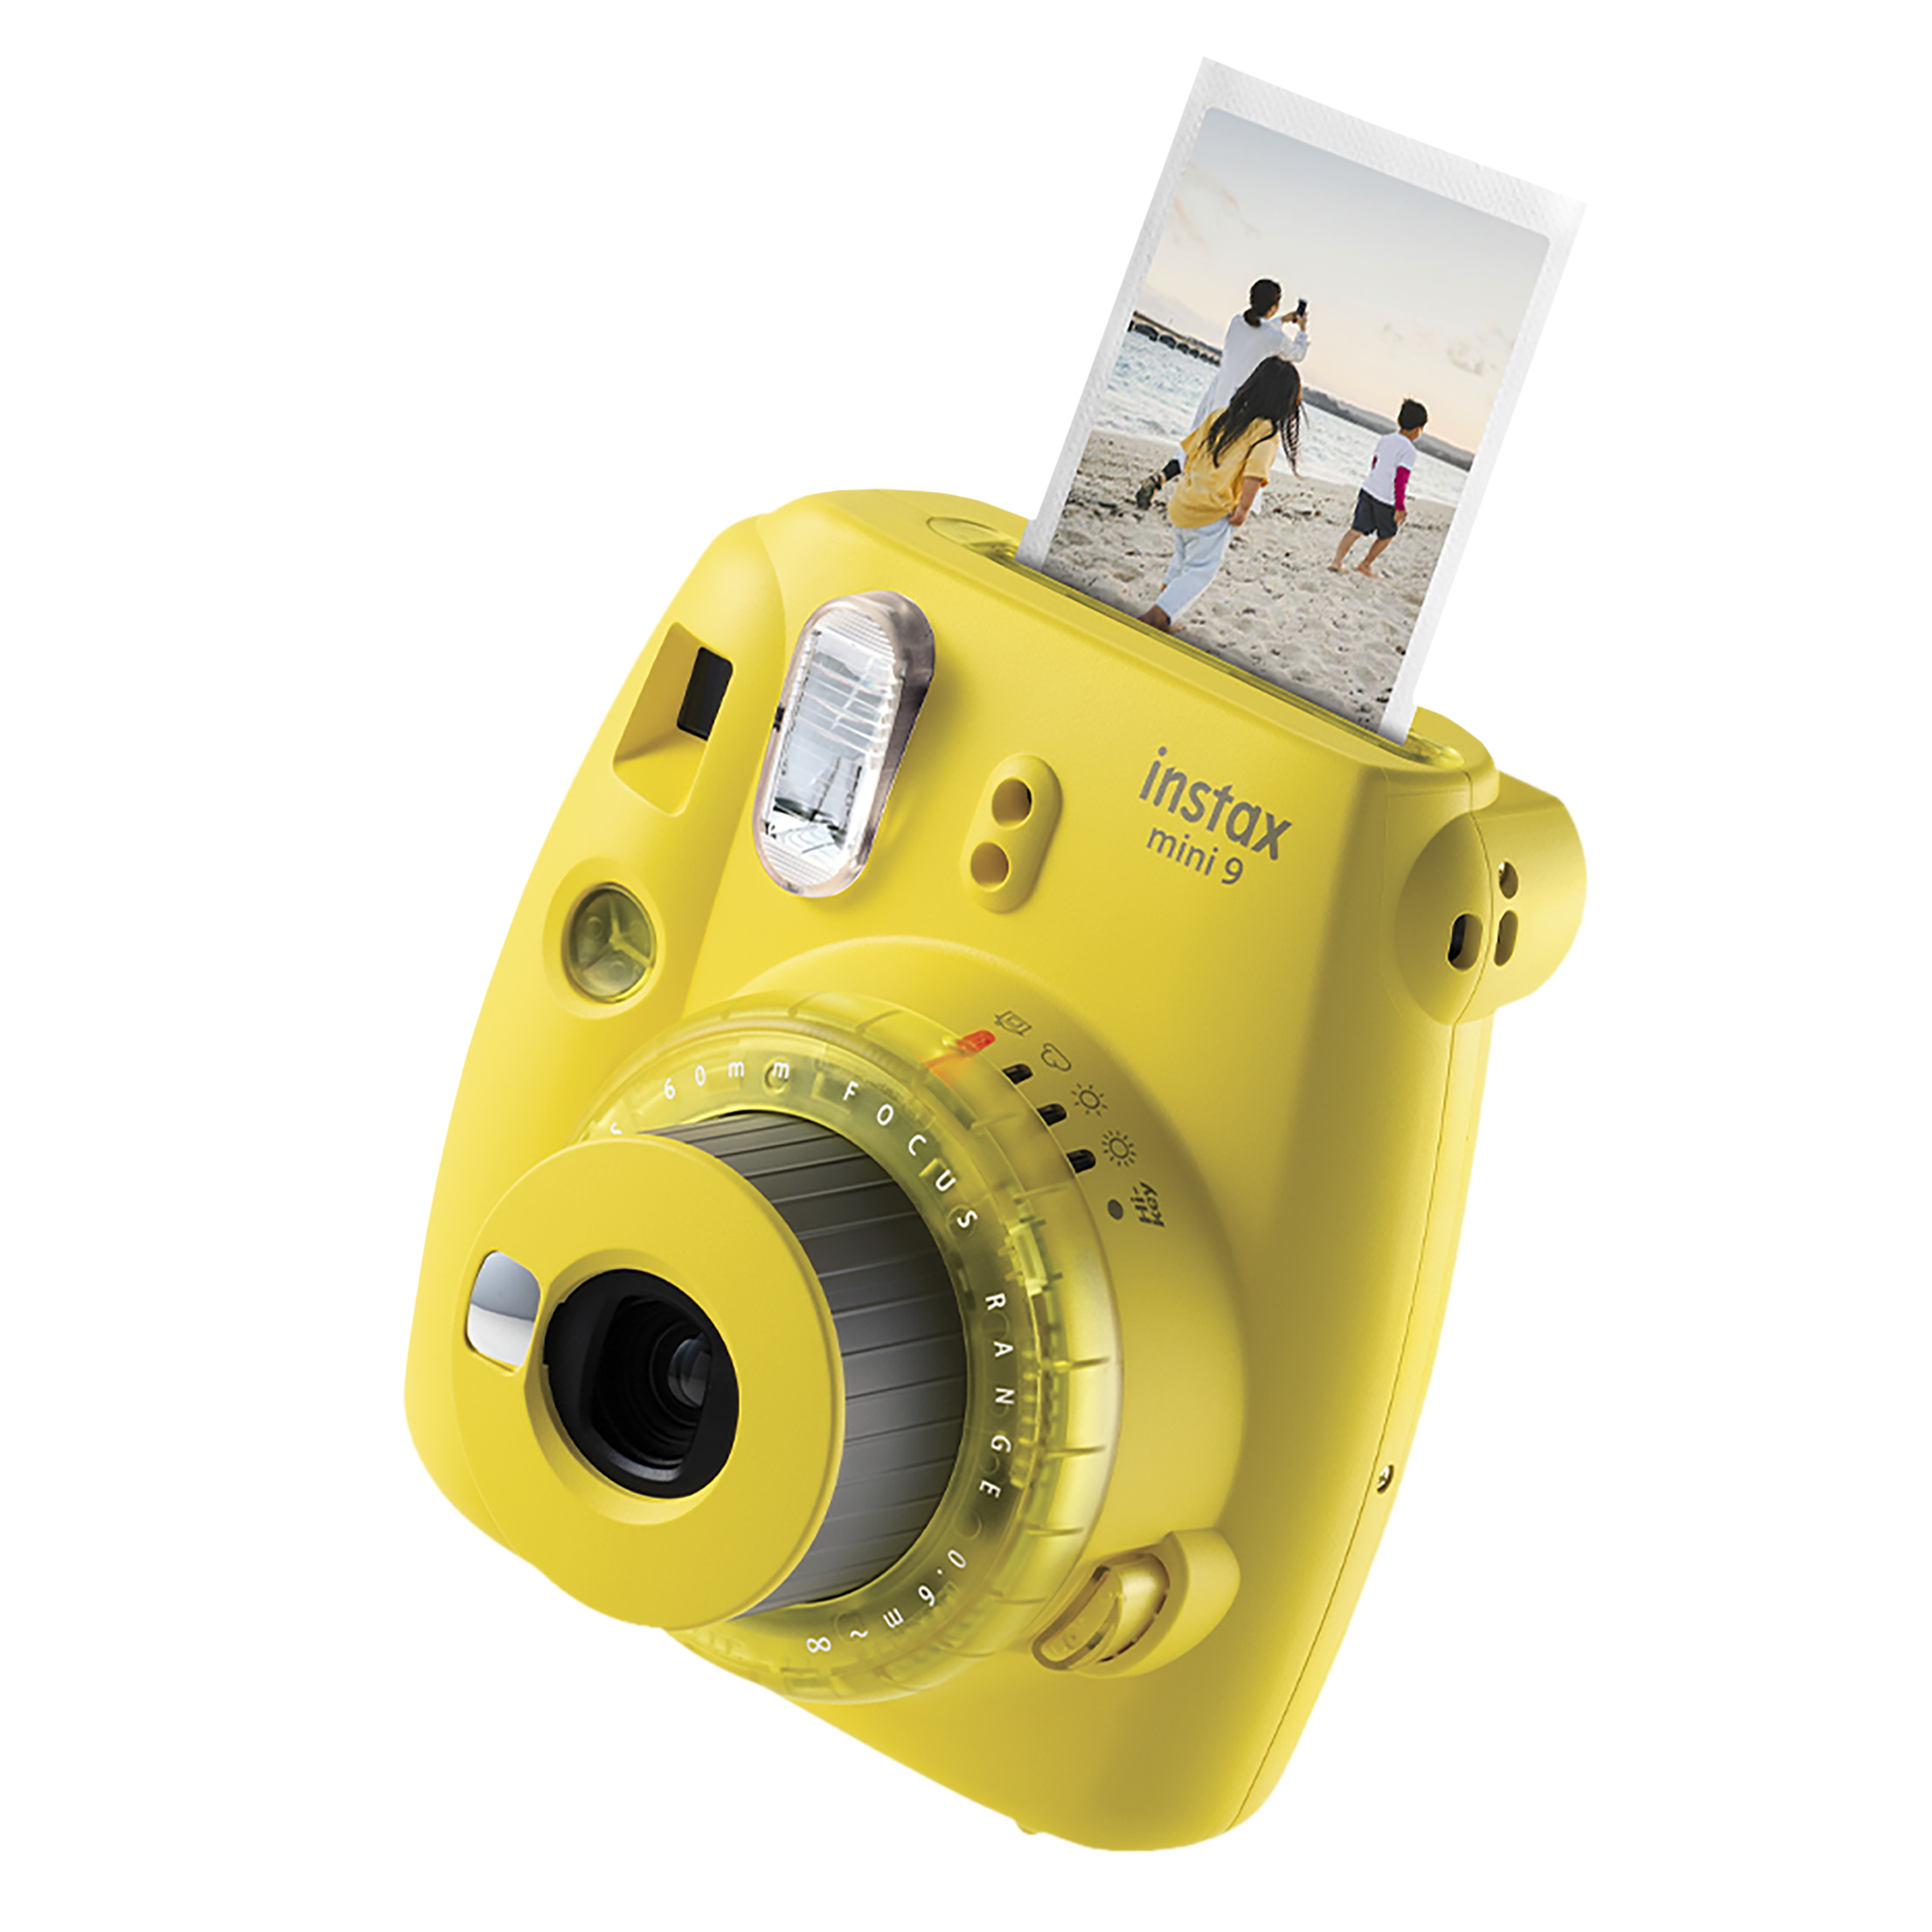 Fujifilm instax mini 9 Instant Film Camera with Clear Accents, Yellow  16632972